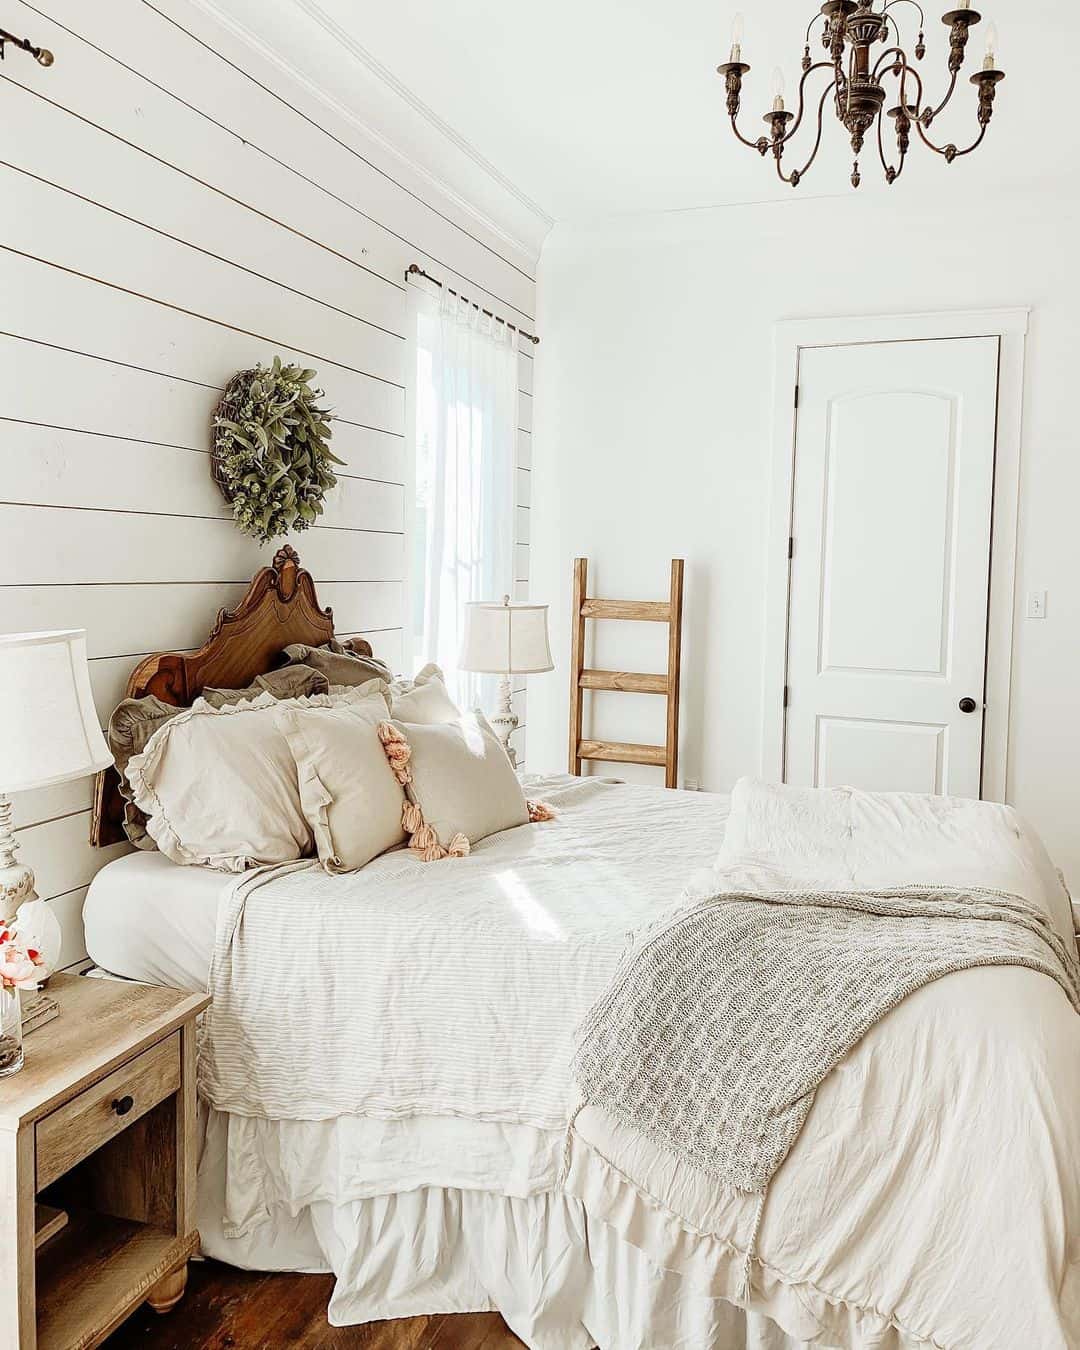 Rustic Charm in a Farmhouse Bedroom